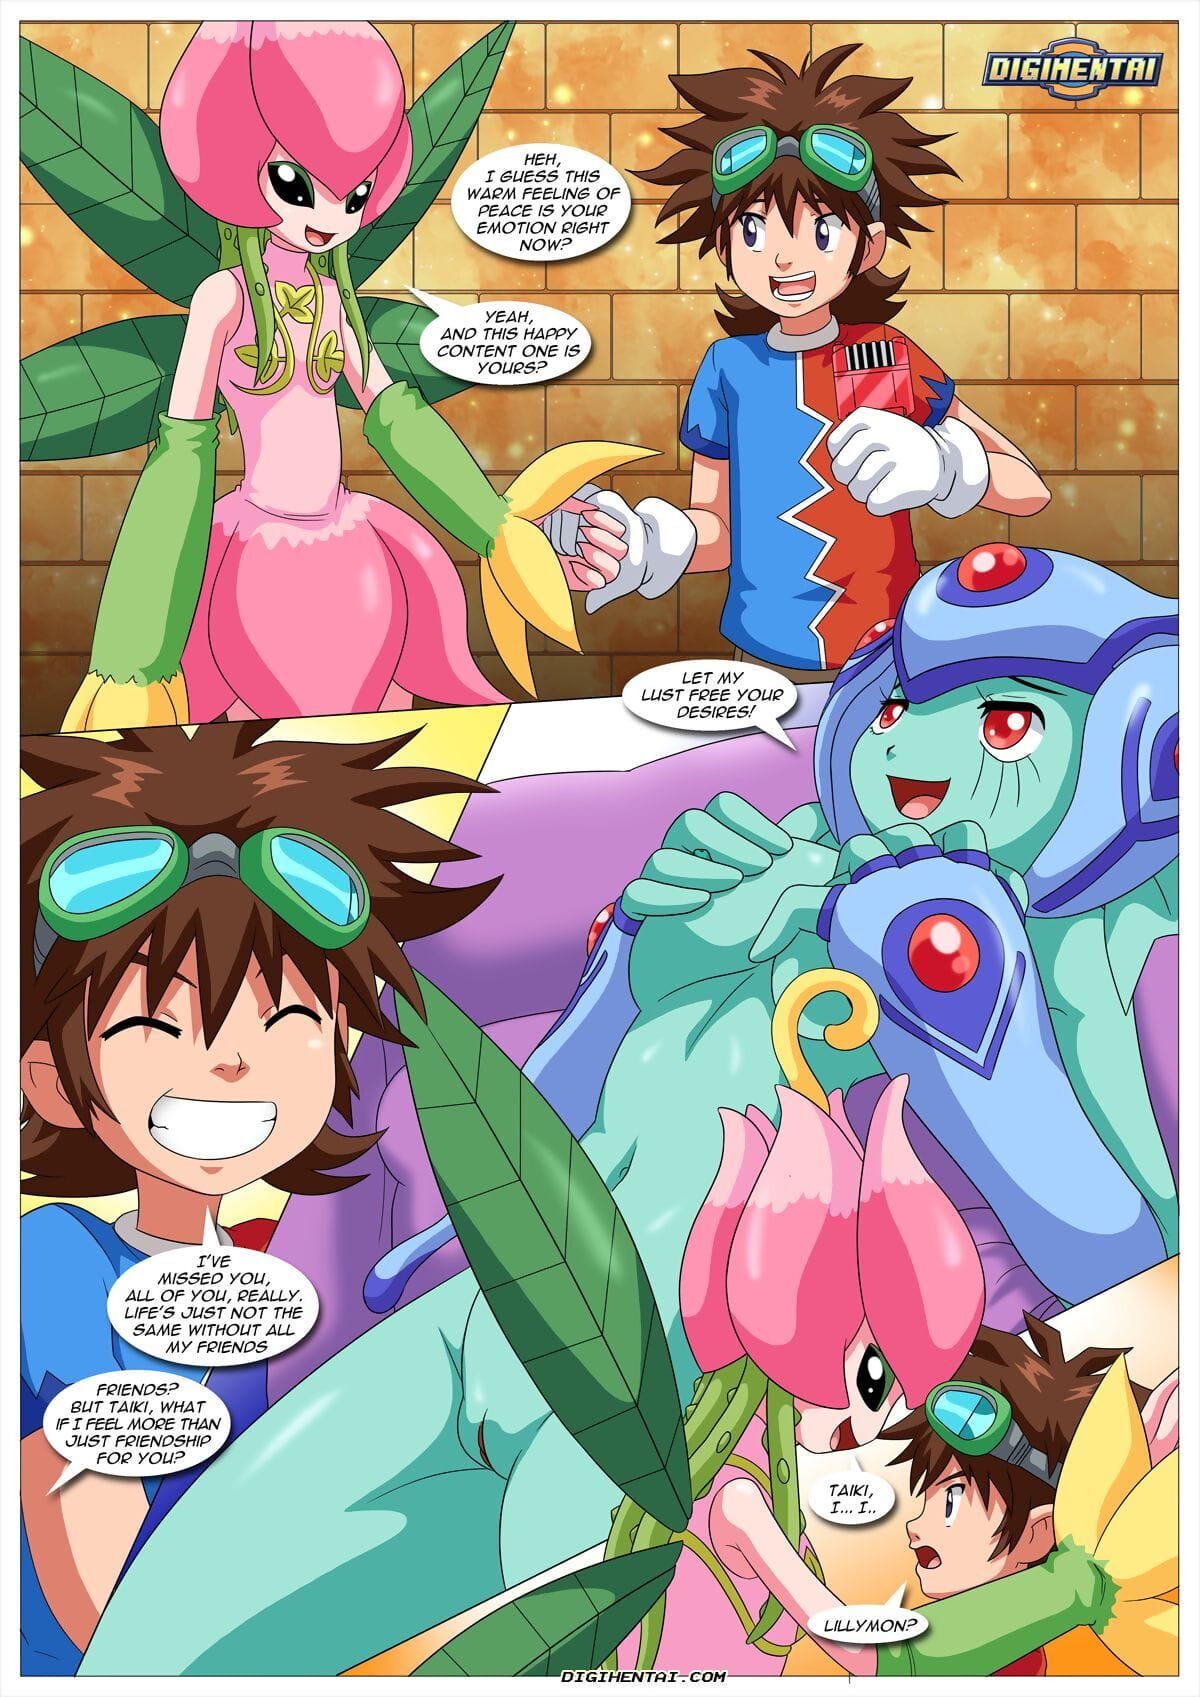 digimon digtal lovero – palcomix page 1